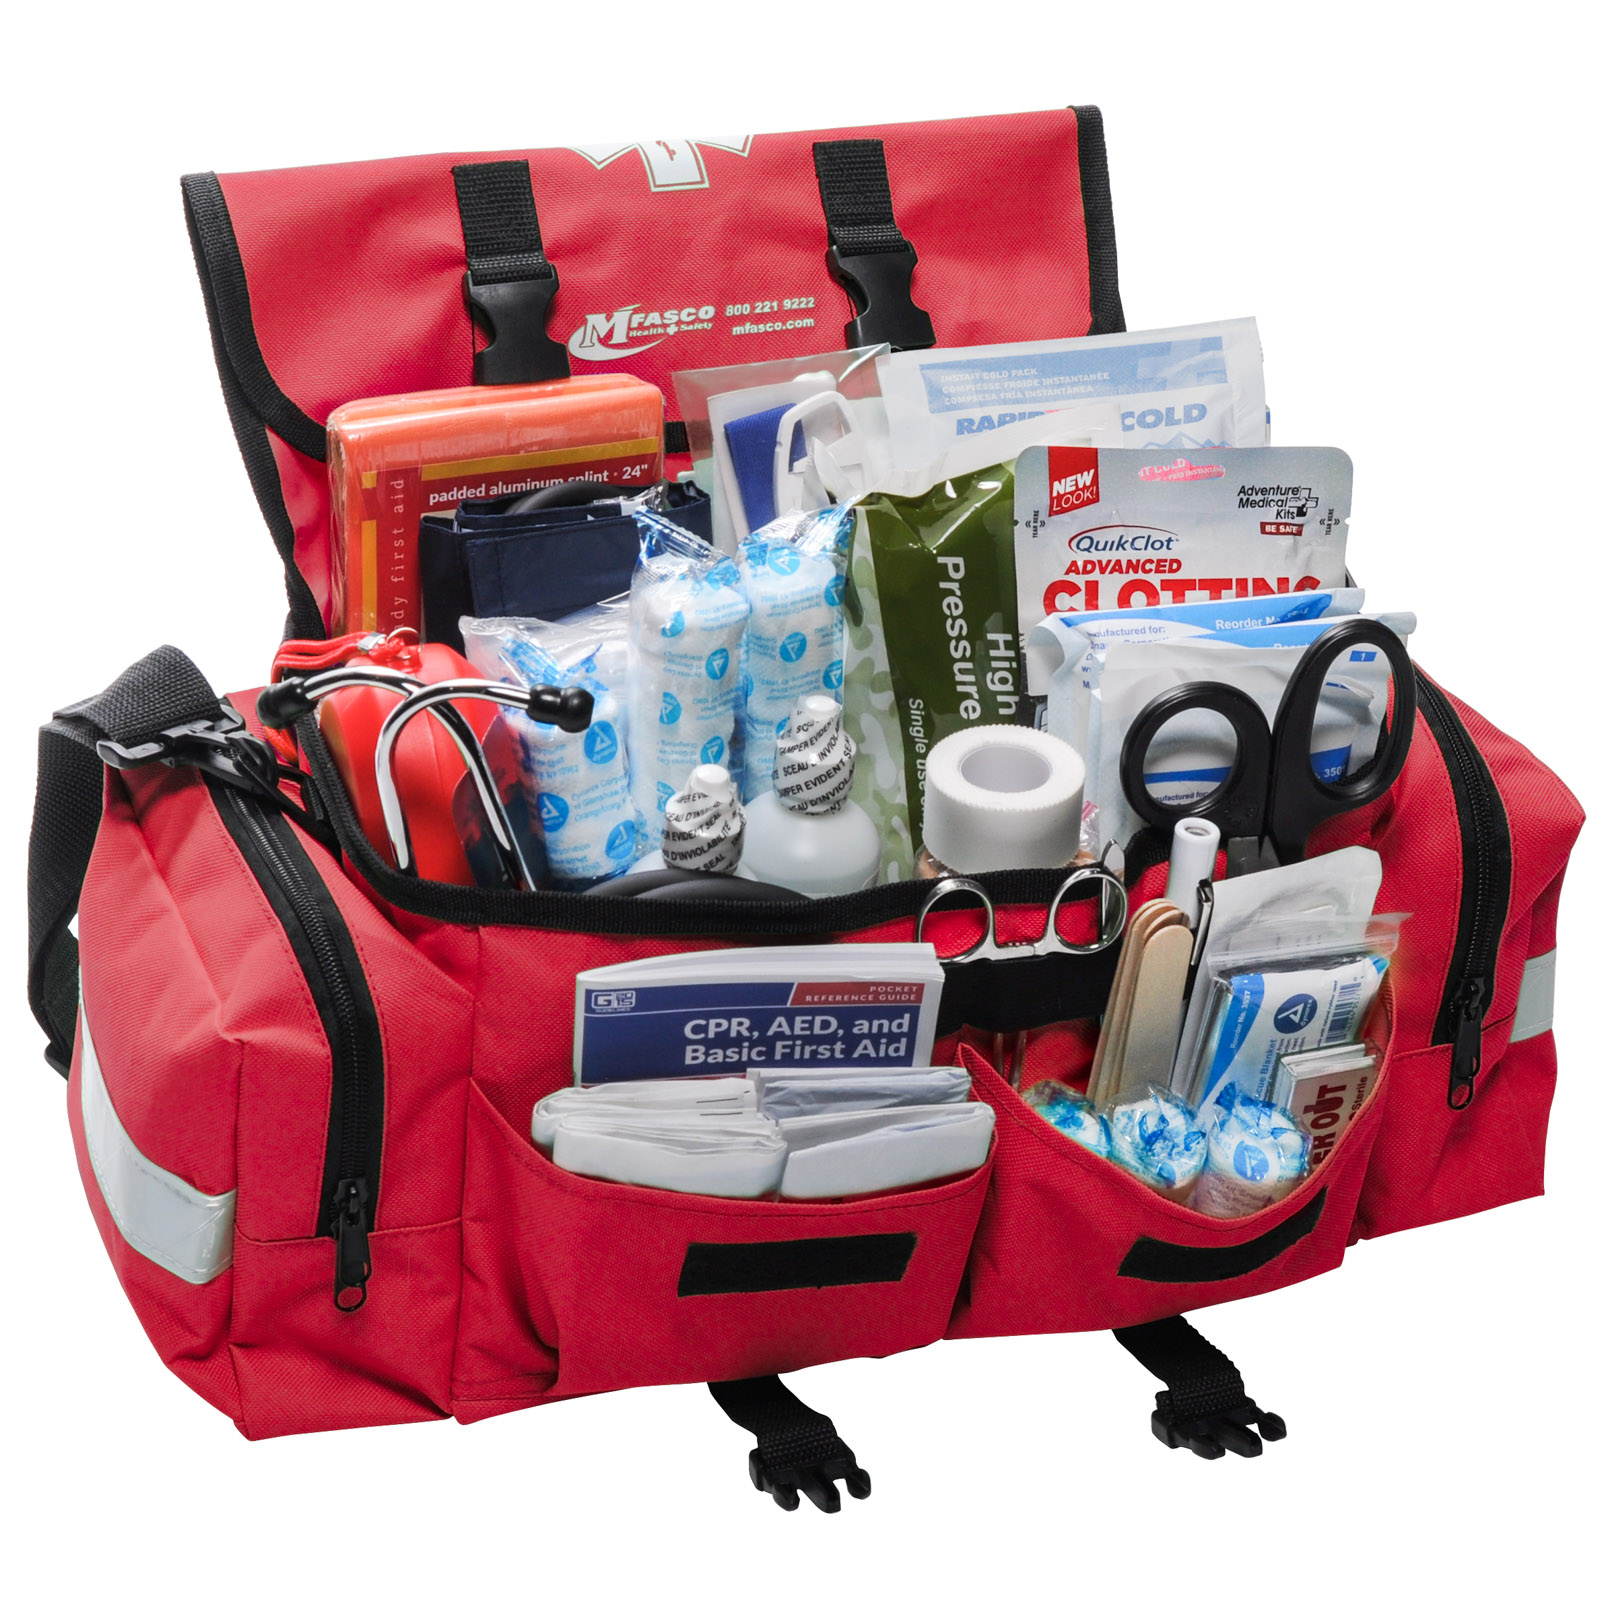 A Natural First Aid Kit for Travel